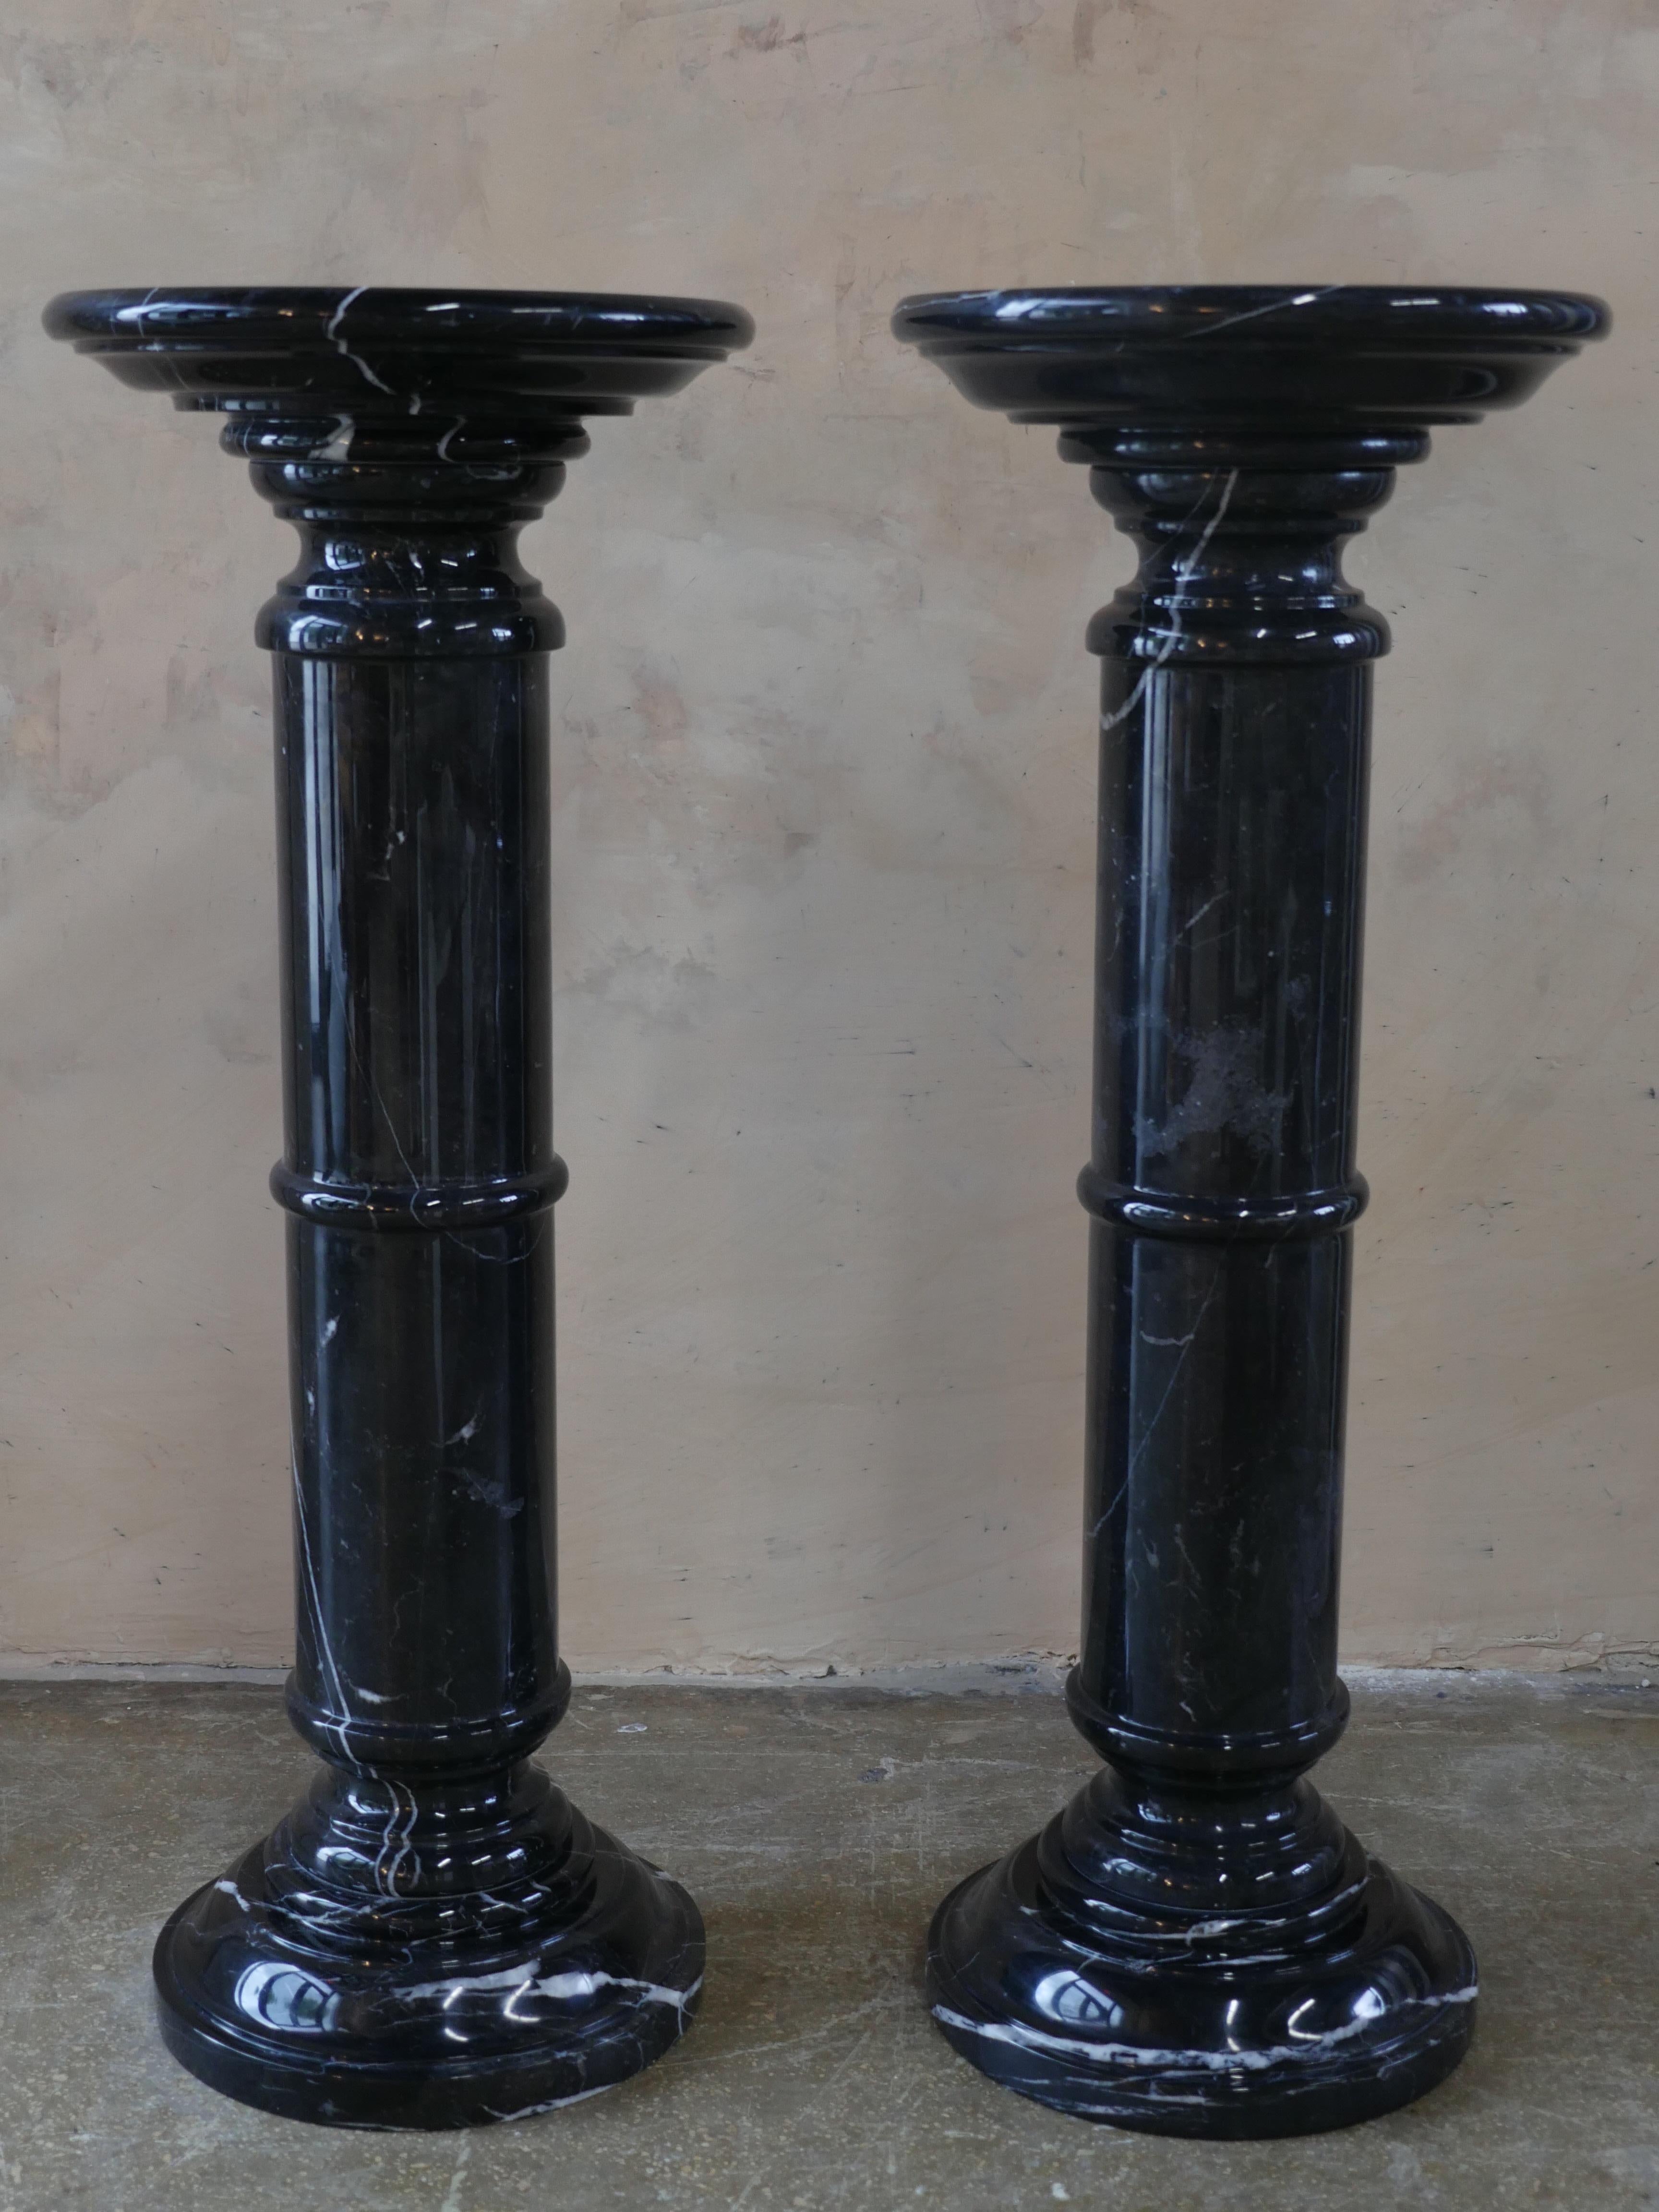 Beautiful pair of 1970s Nero Marquina Marble pedestals. The pedestals are in great condition as they have been professionally polished by hand, to achieve a stunning, reflective look.